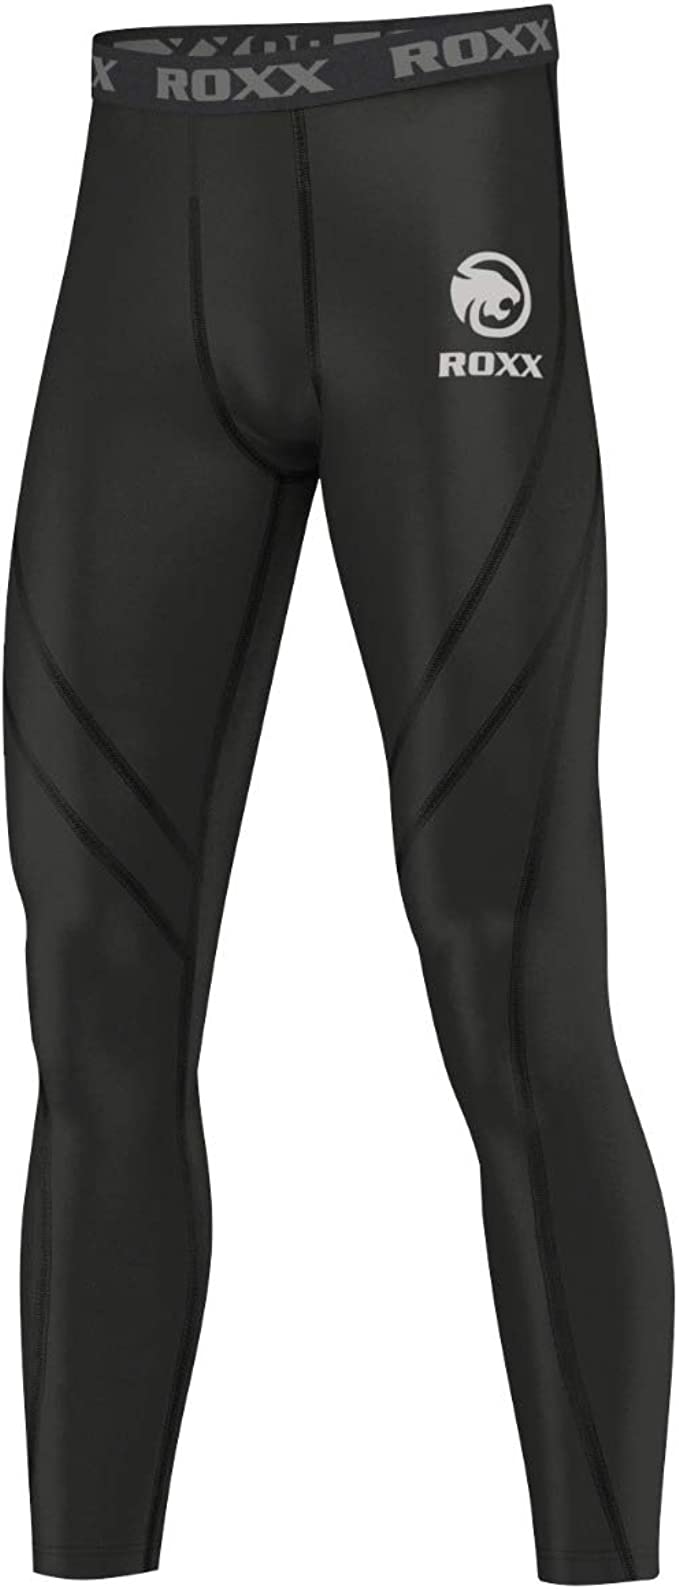 Mens Compression Tights + Top Base Layer Skin Tights Shirt Armour Full Suit